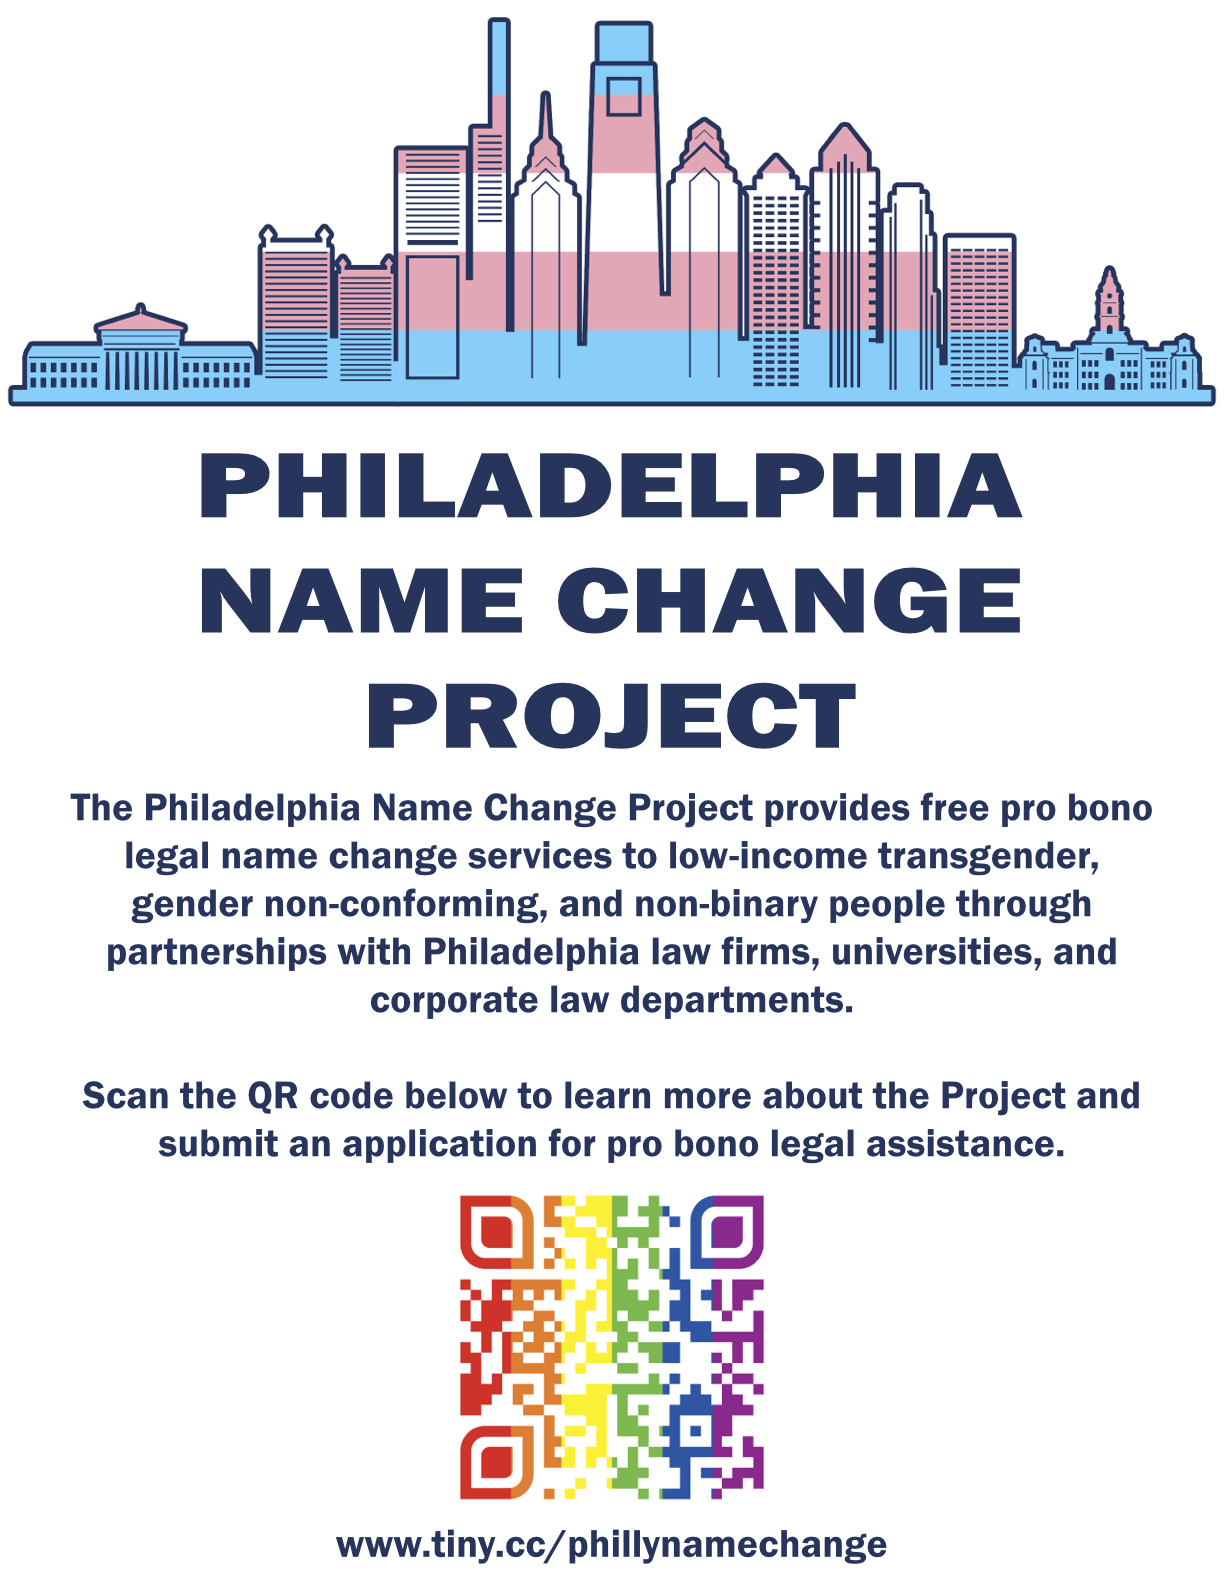 the flyer for the Philadelphia Name Change Project. The Philadelphia Name Change Project provides free pro bono legal name change services to low-income transgender, gender non-conforming, and non-binary people through partnerships with Philadelphia law firms, universities, and corporate law departments. Scan the QR code below to learn more about the Project and submit an application for pro bono legal assistance.